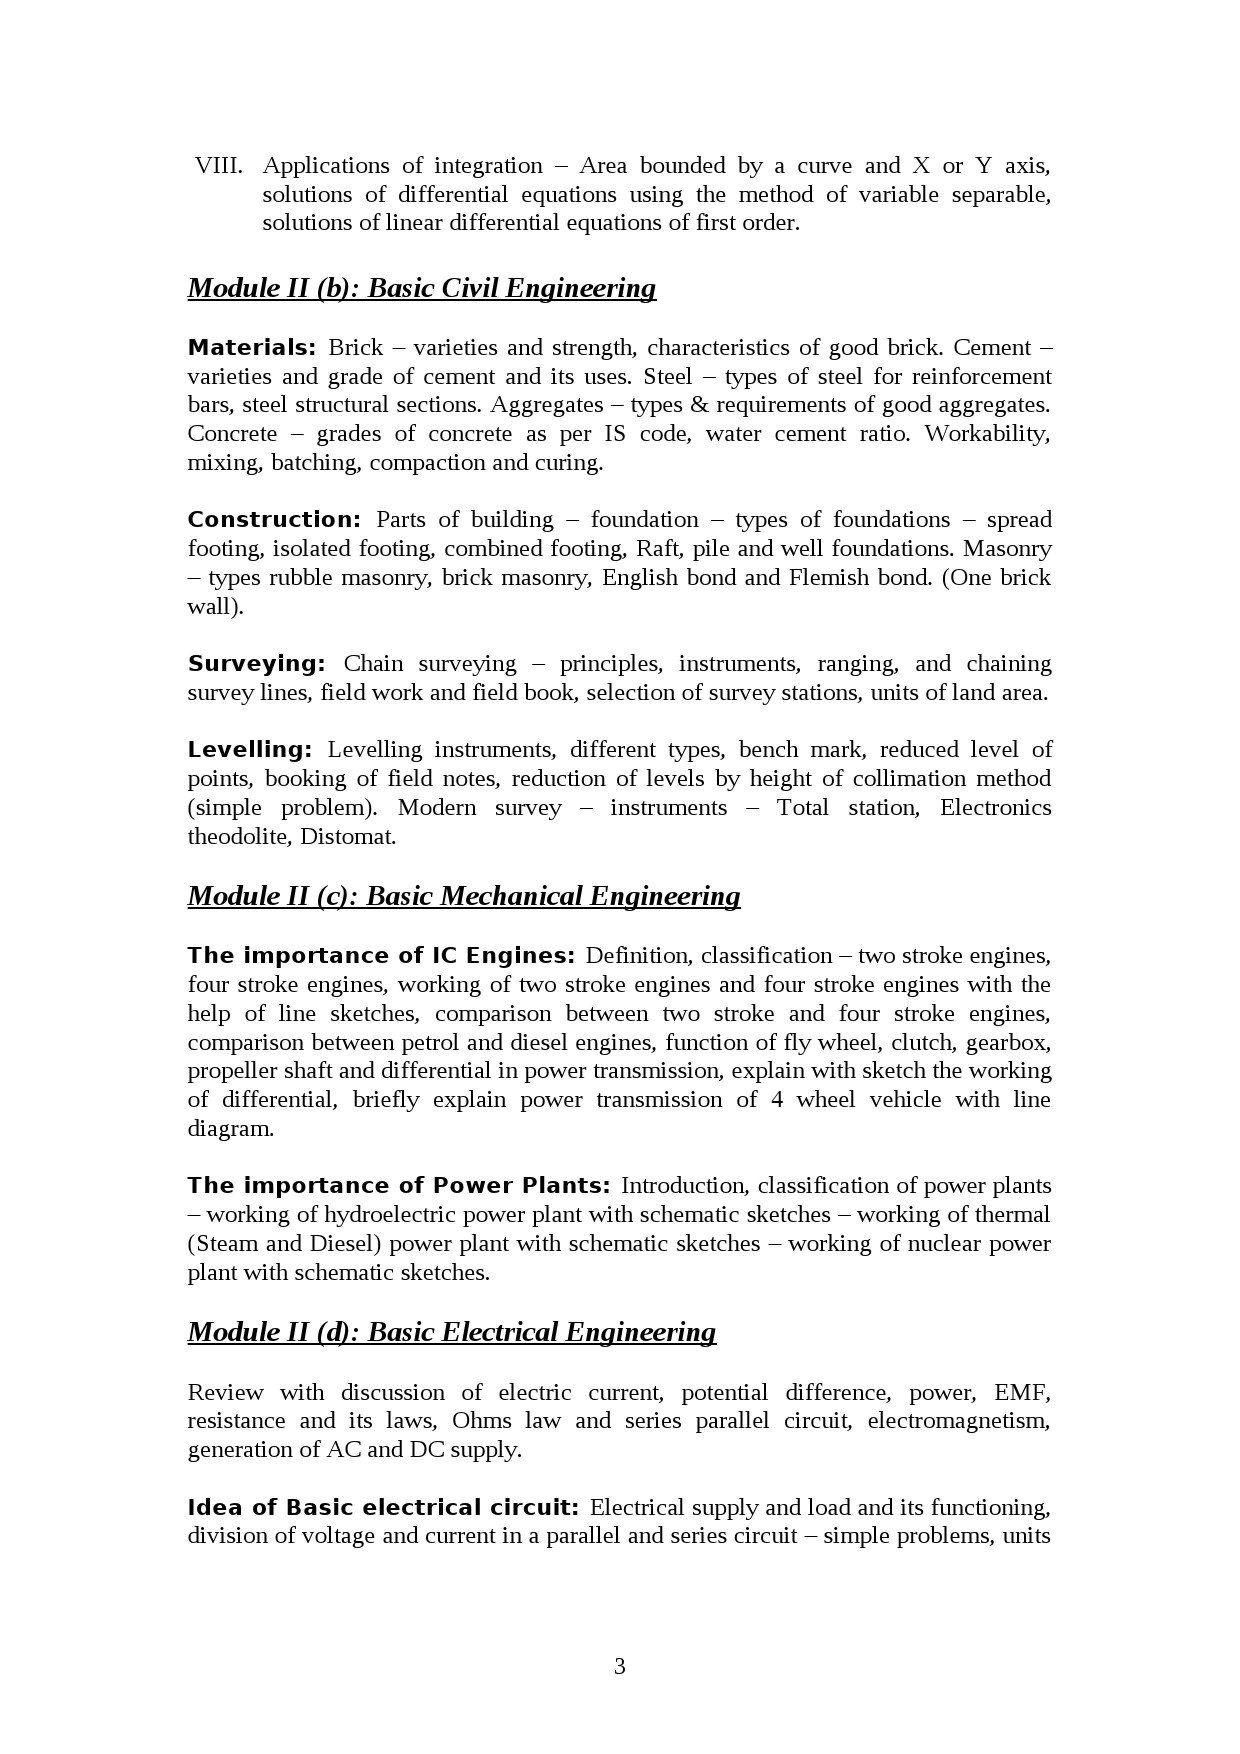 Printing Technology Lecturer in Polytechnic Exam Syllabus - Notification Image 3